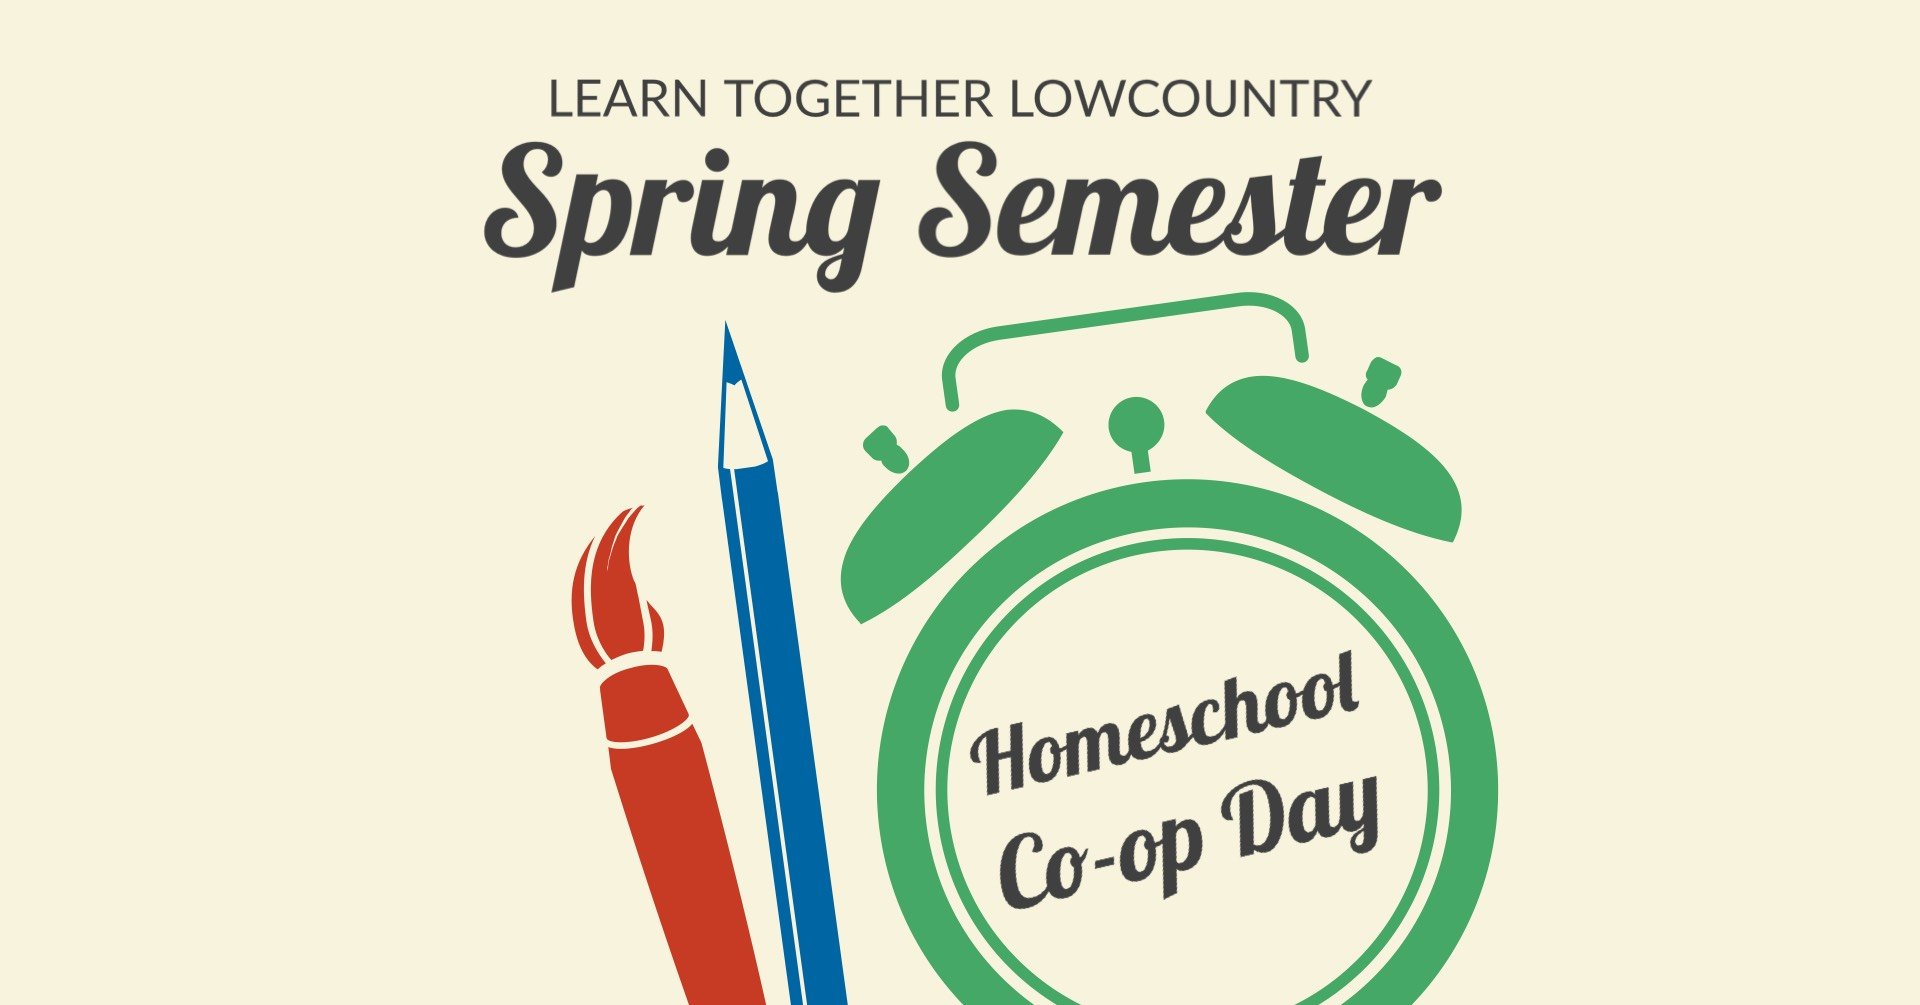 LTL Events — Learn Together Lowcountry